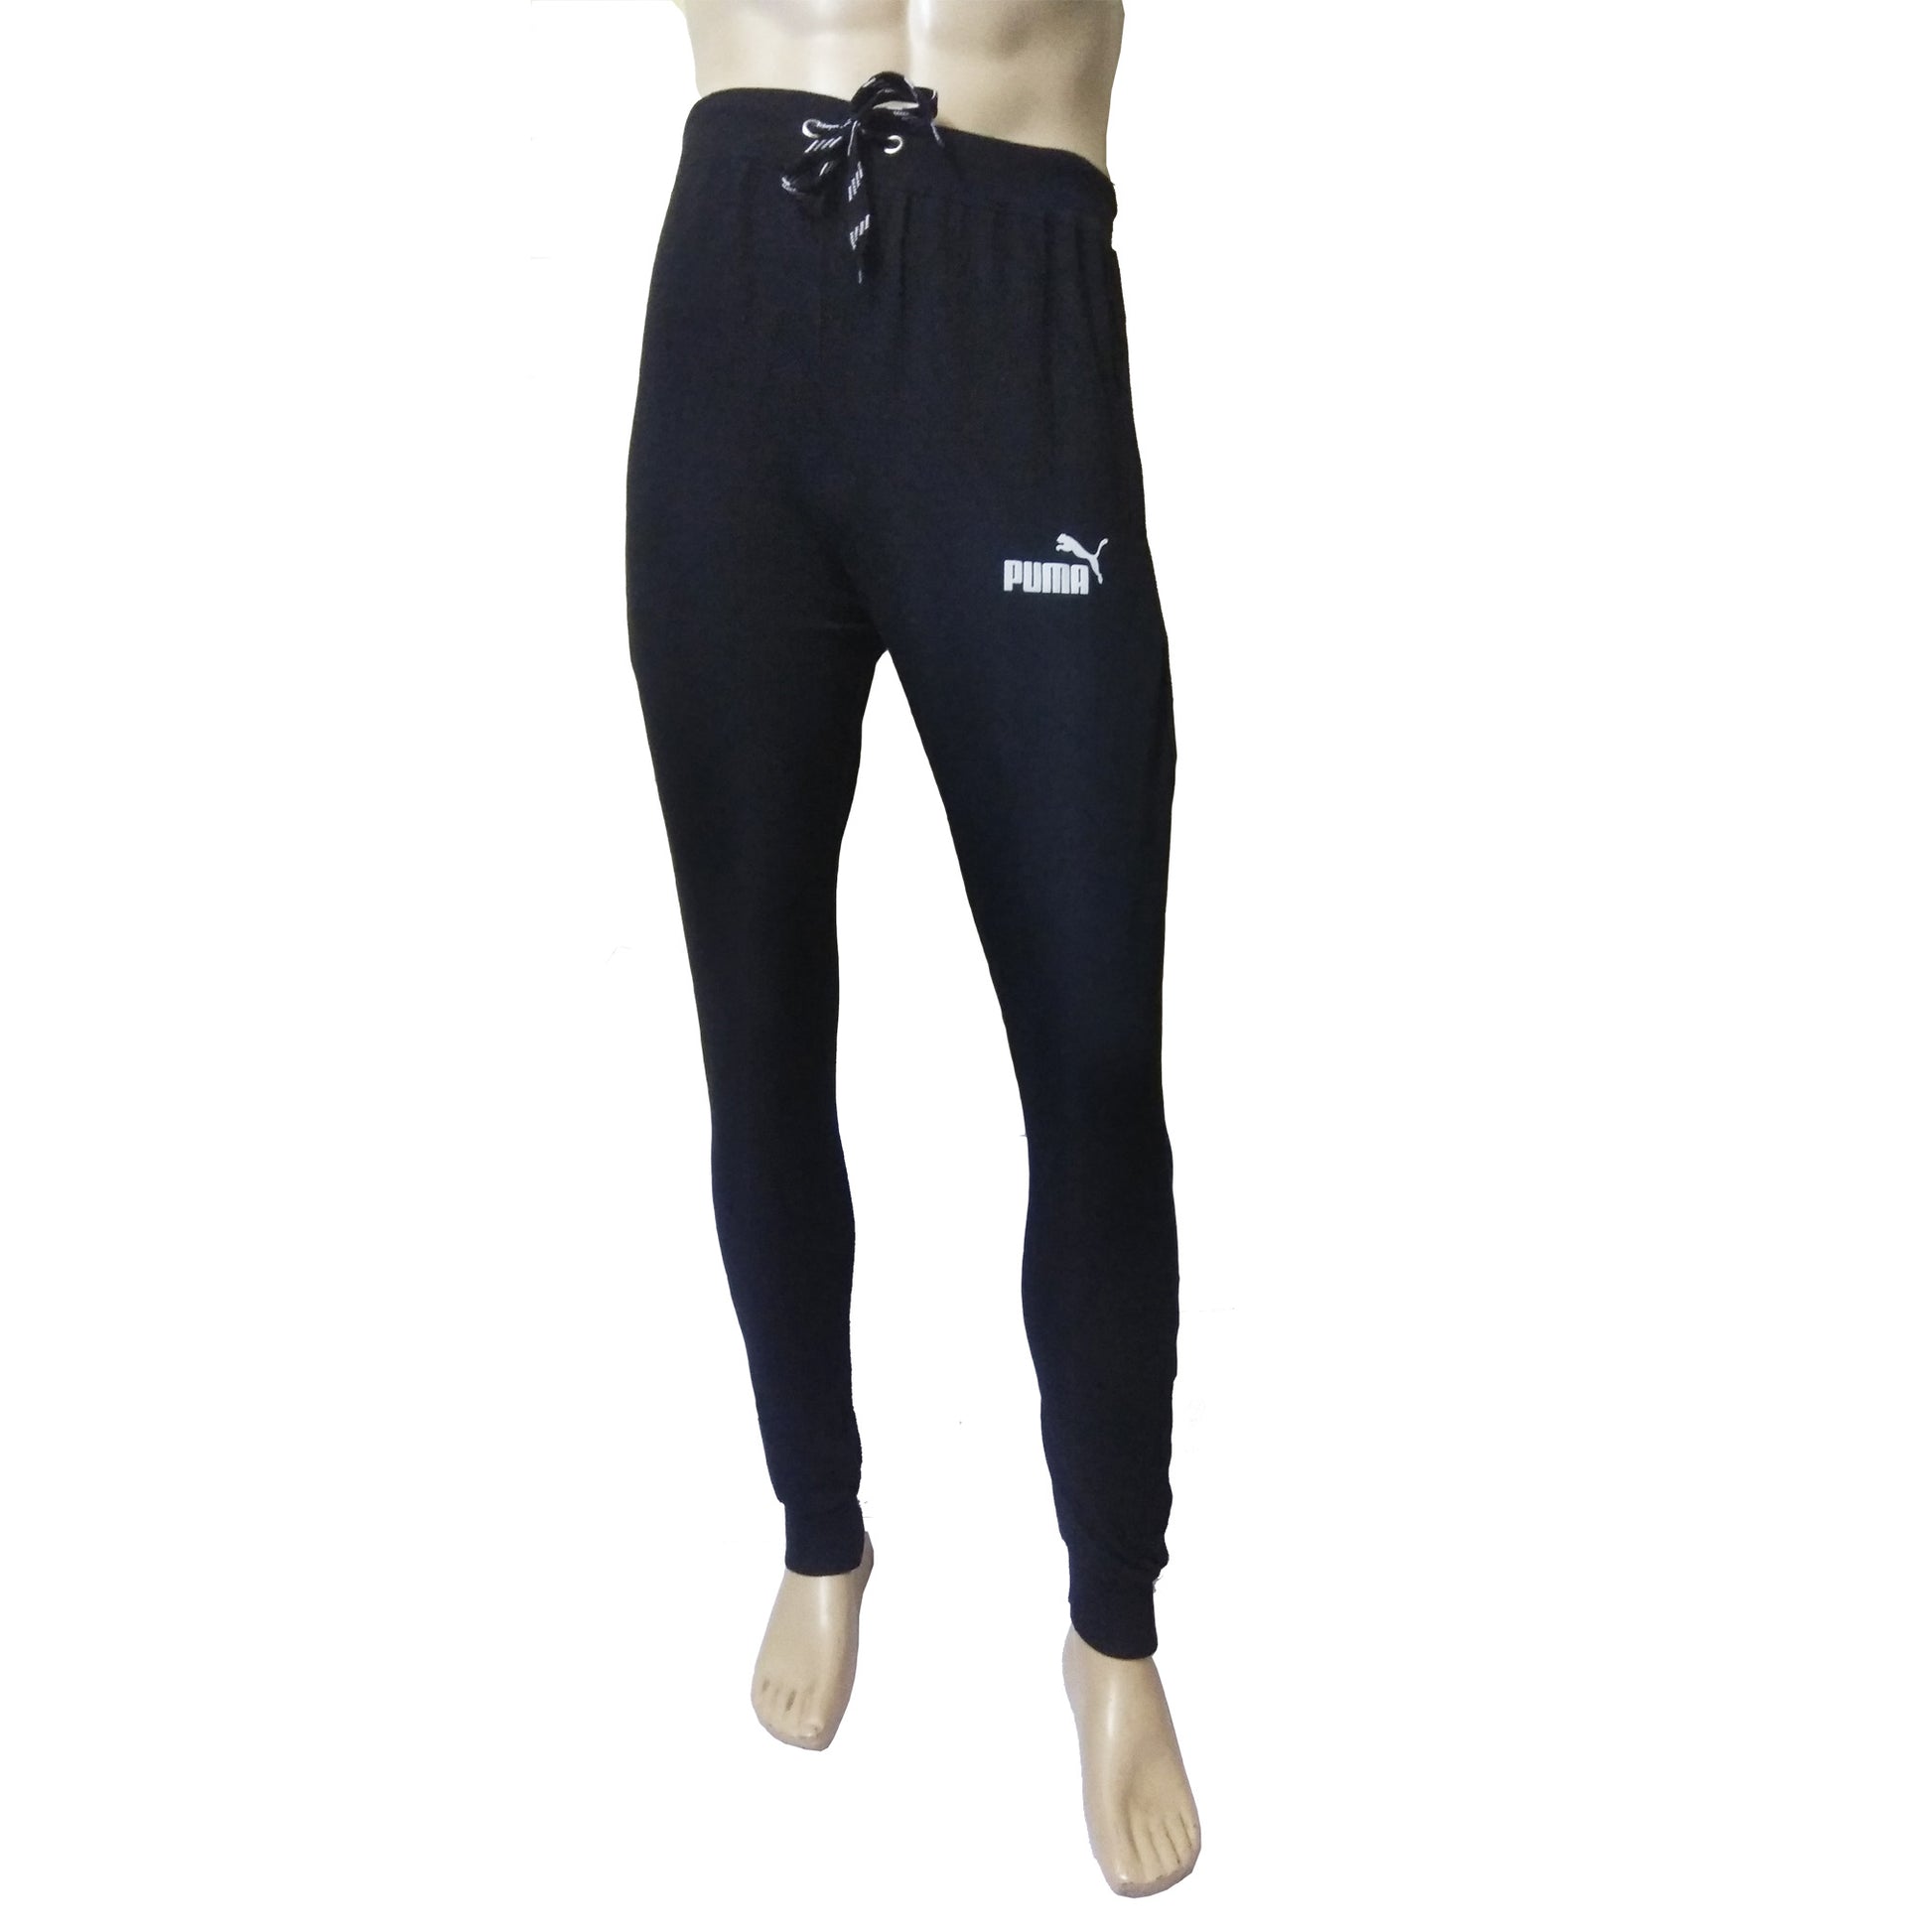 Branded Night Pant/Track Suit for men Black Colour - Faritha